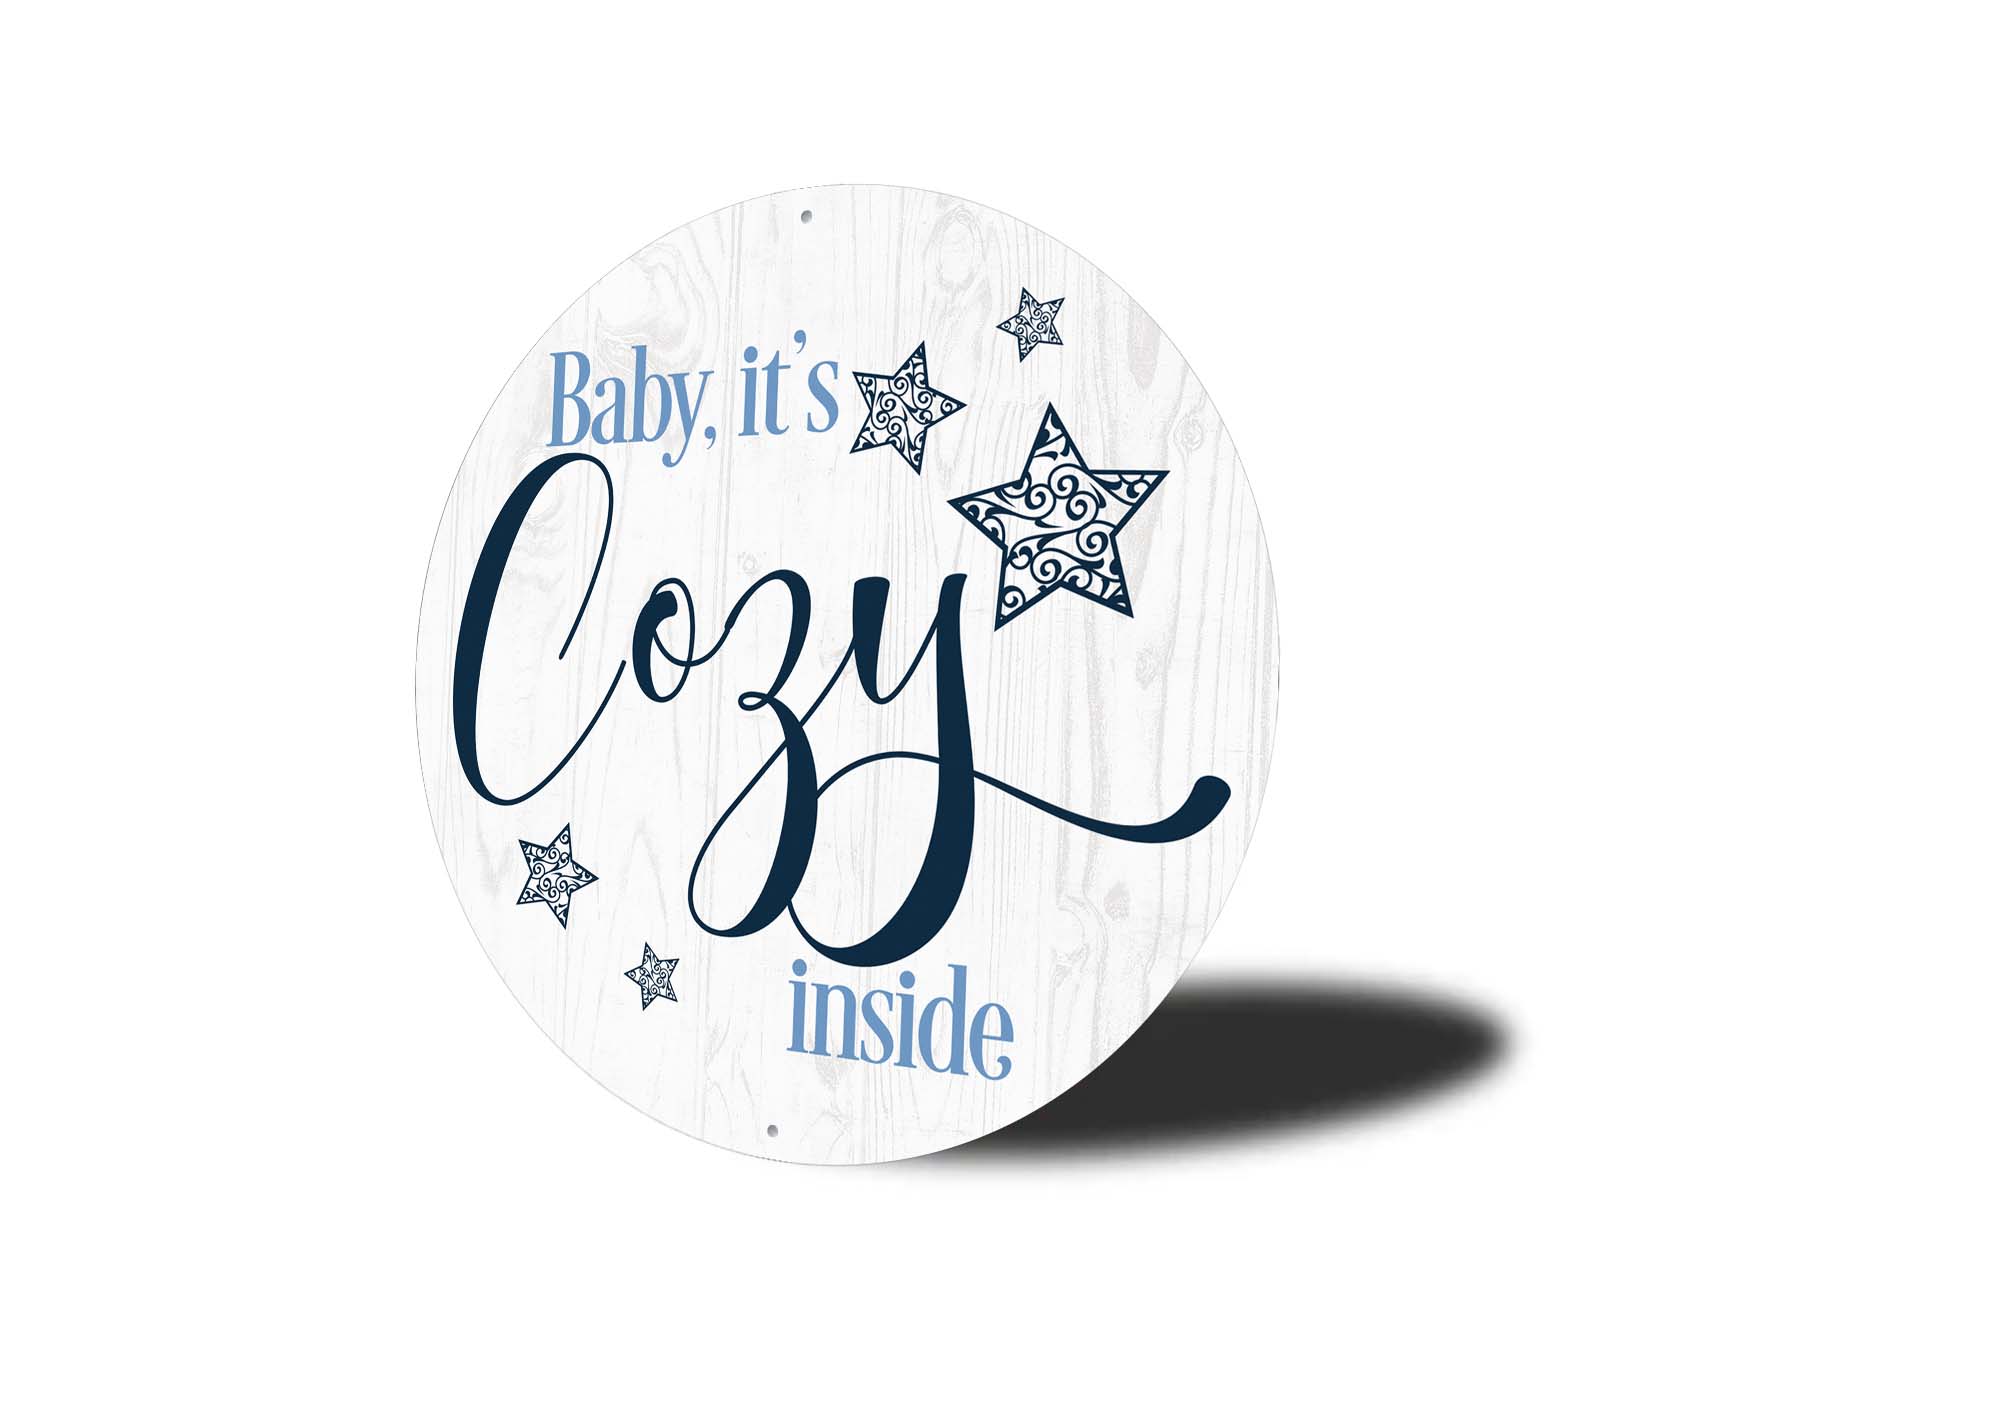 Baby Its Cozy Inside Round Metal Sign